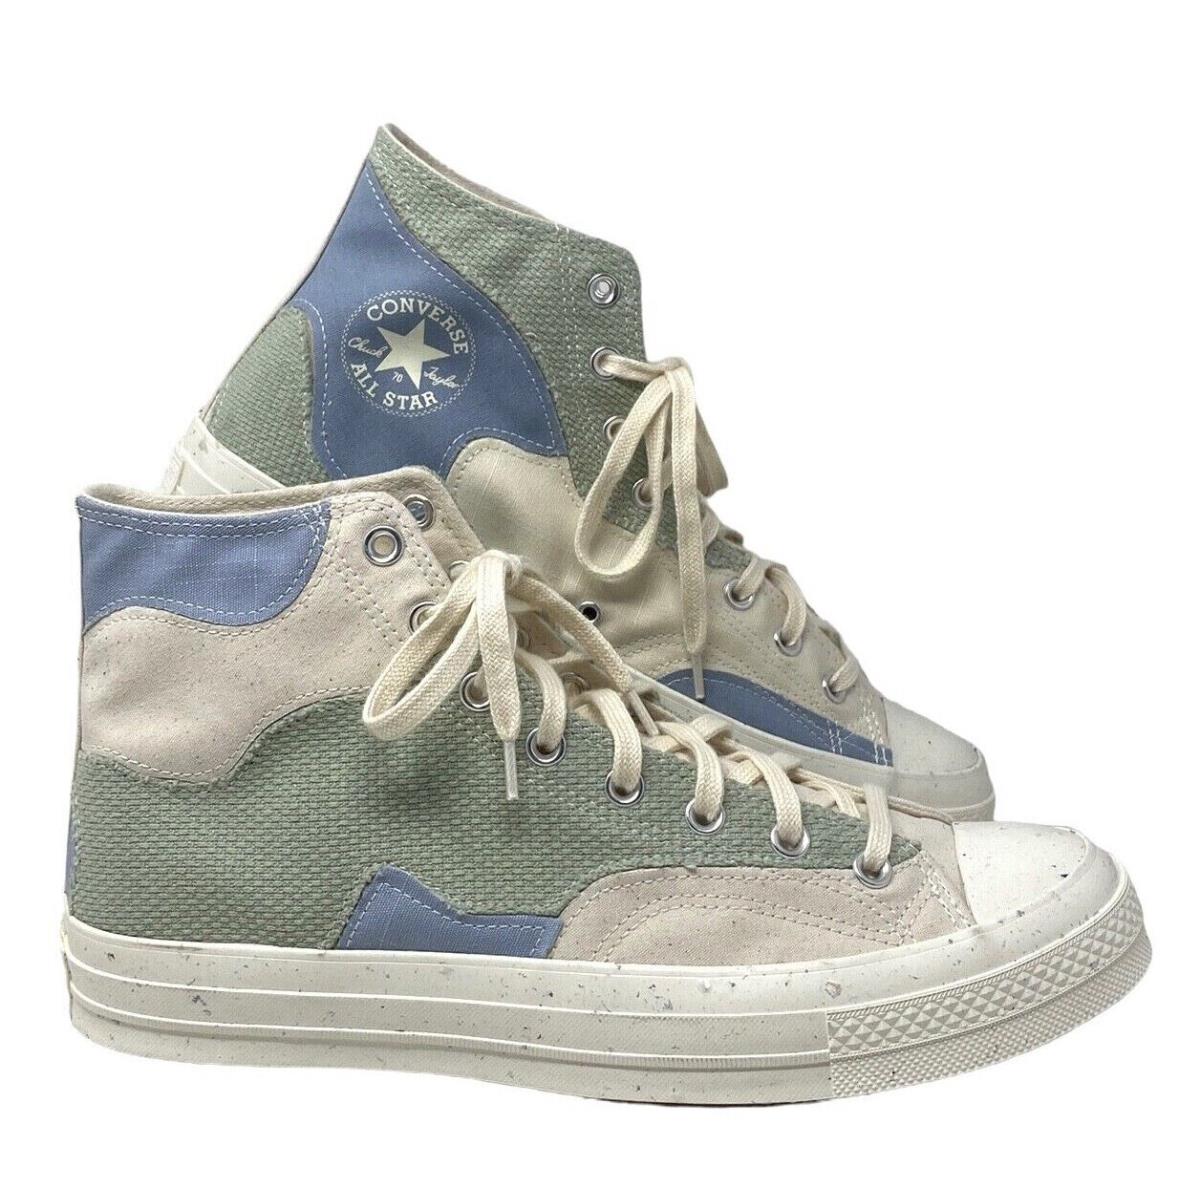 Converse Chuck 70 Shoes For Men Natural Summit Sage Canvas Sneakers High A02750C